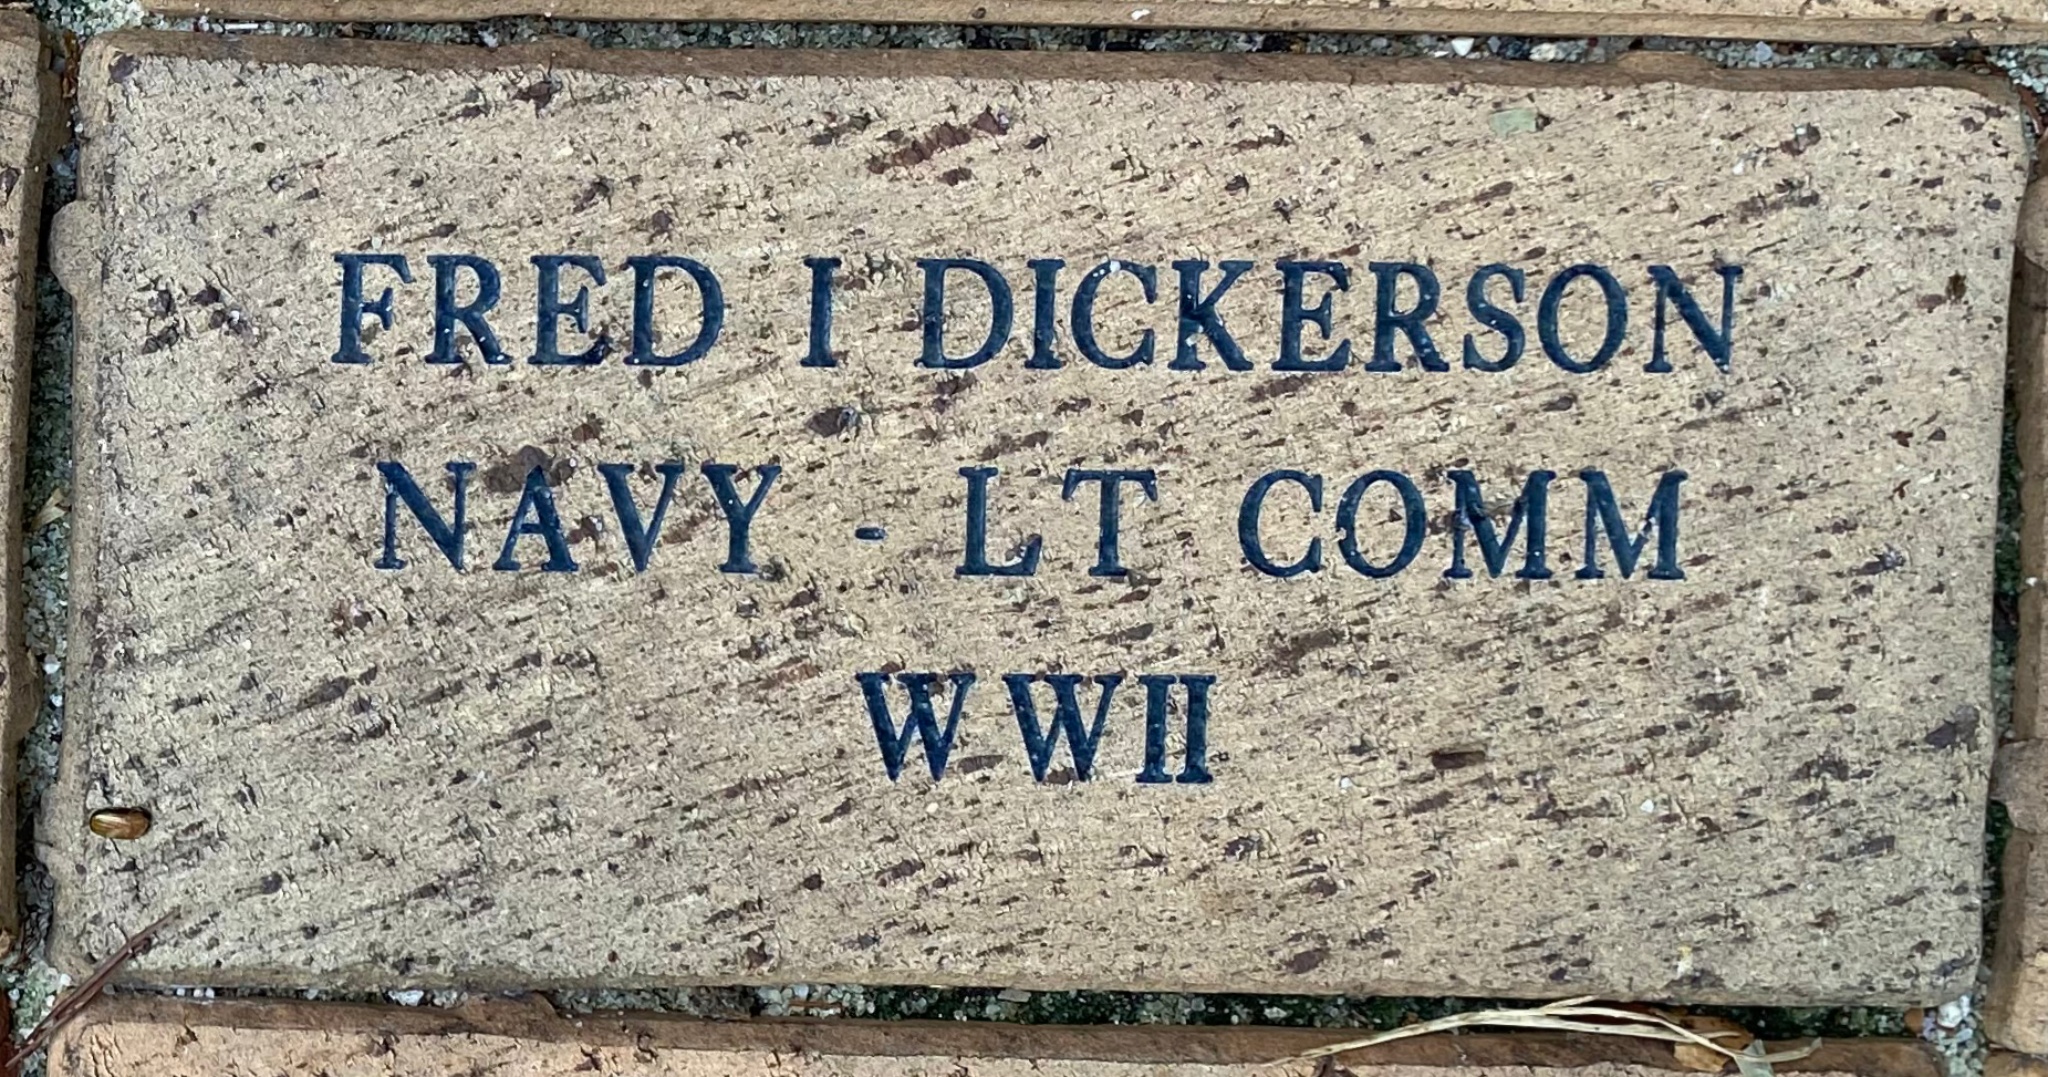 FRED I DICKERSON NAVY LT COMM WWII